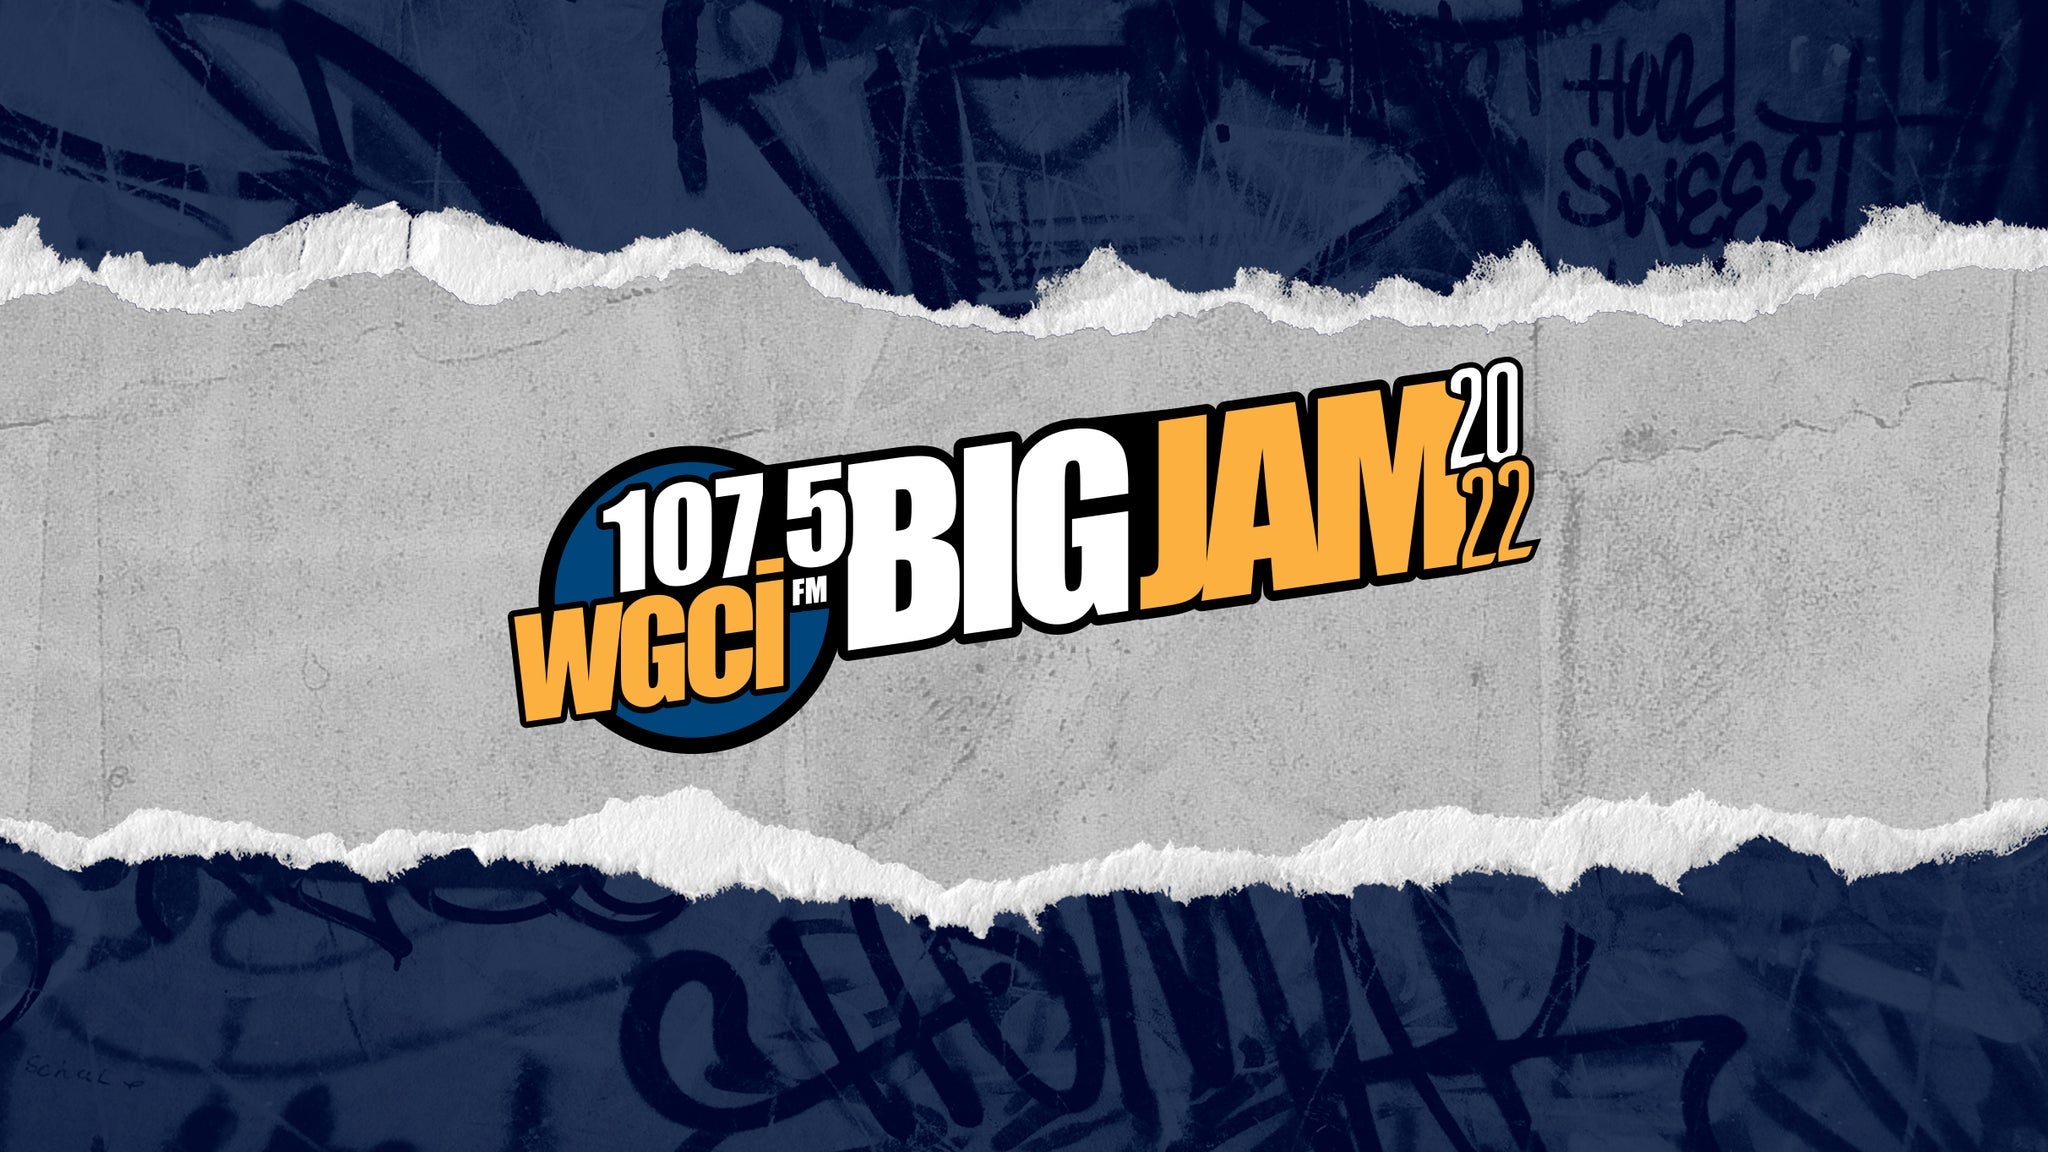 accurate presale code to WGCI Big Jam face value tickets in Chicago